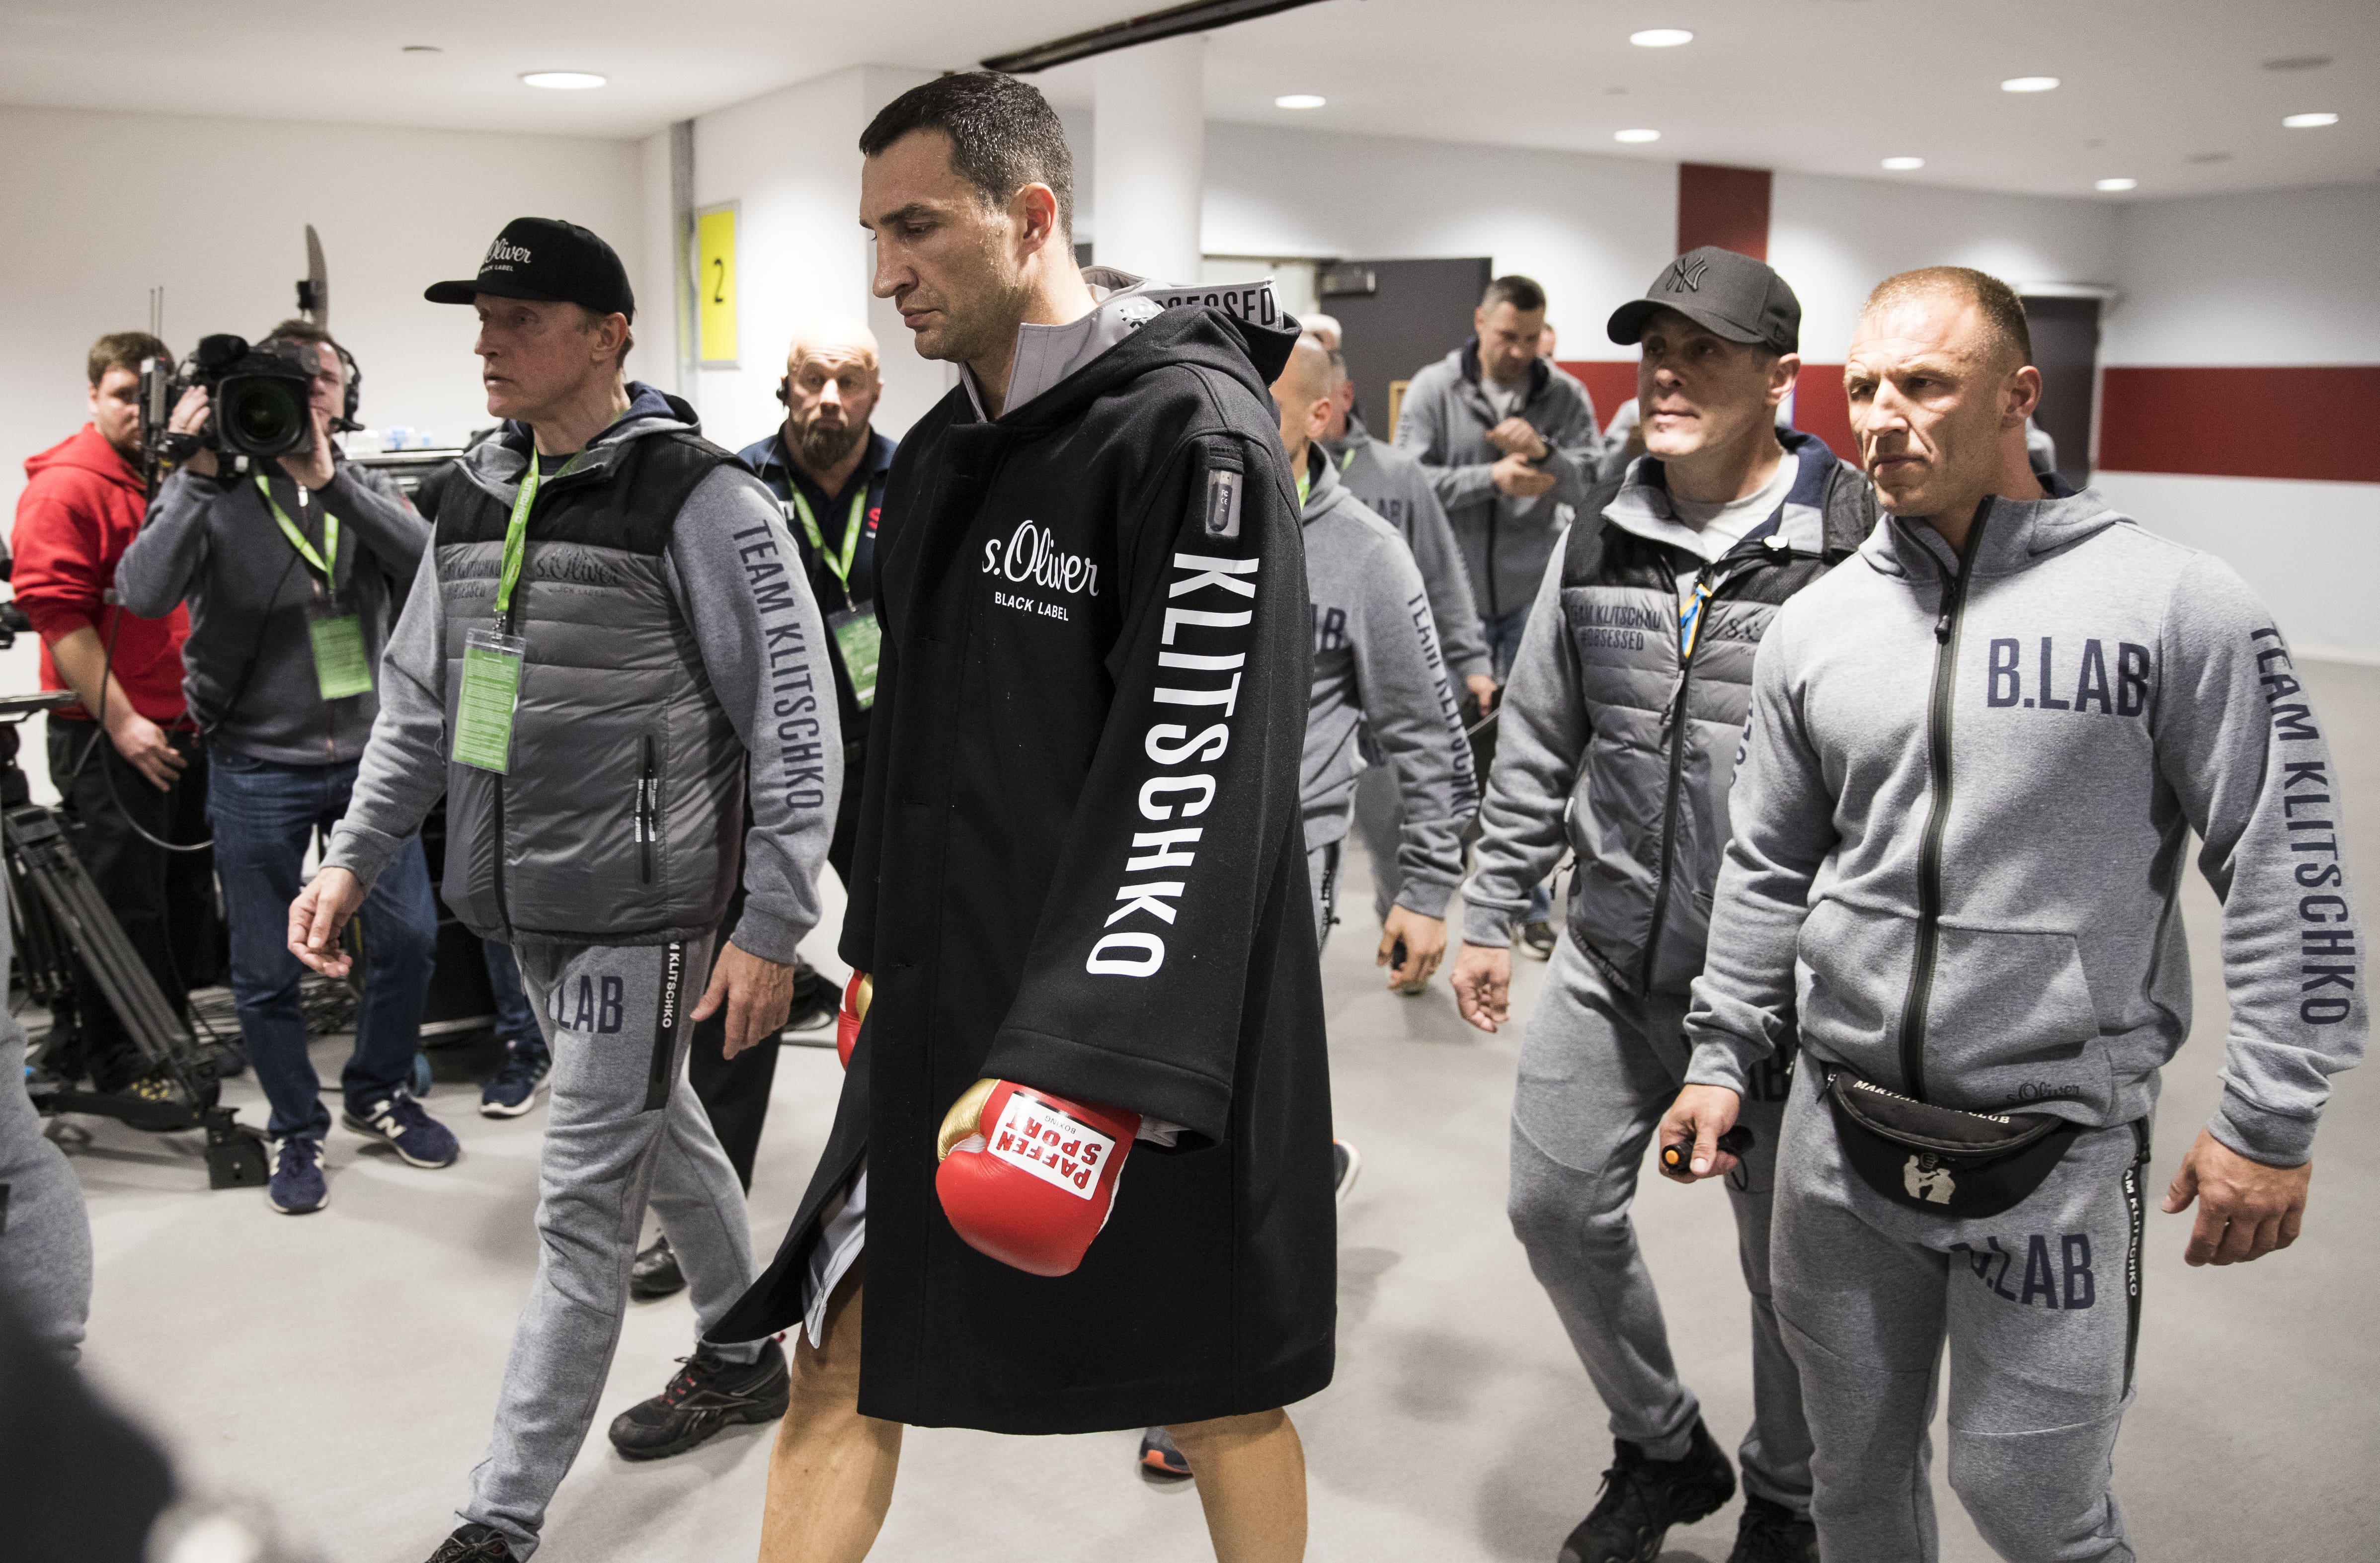 Duran reflects on the night Klitschko lost to Joshua but captured the cutman’s heart 